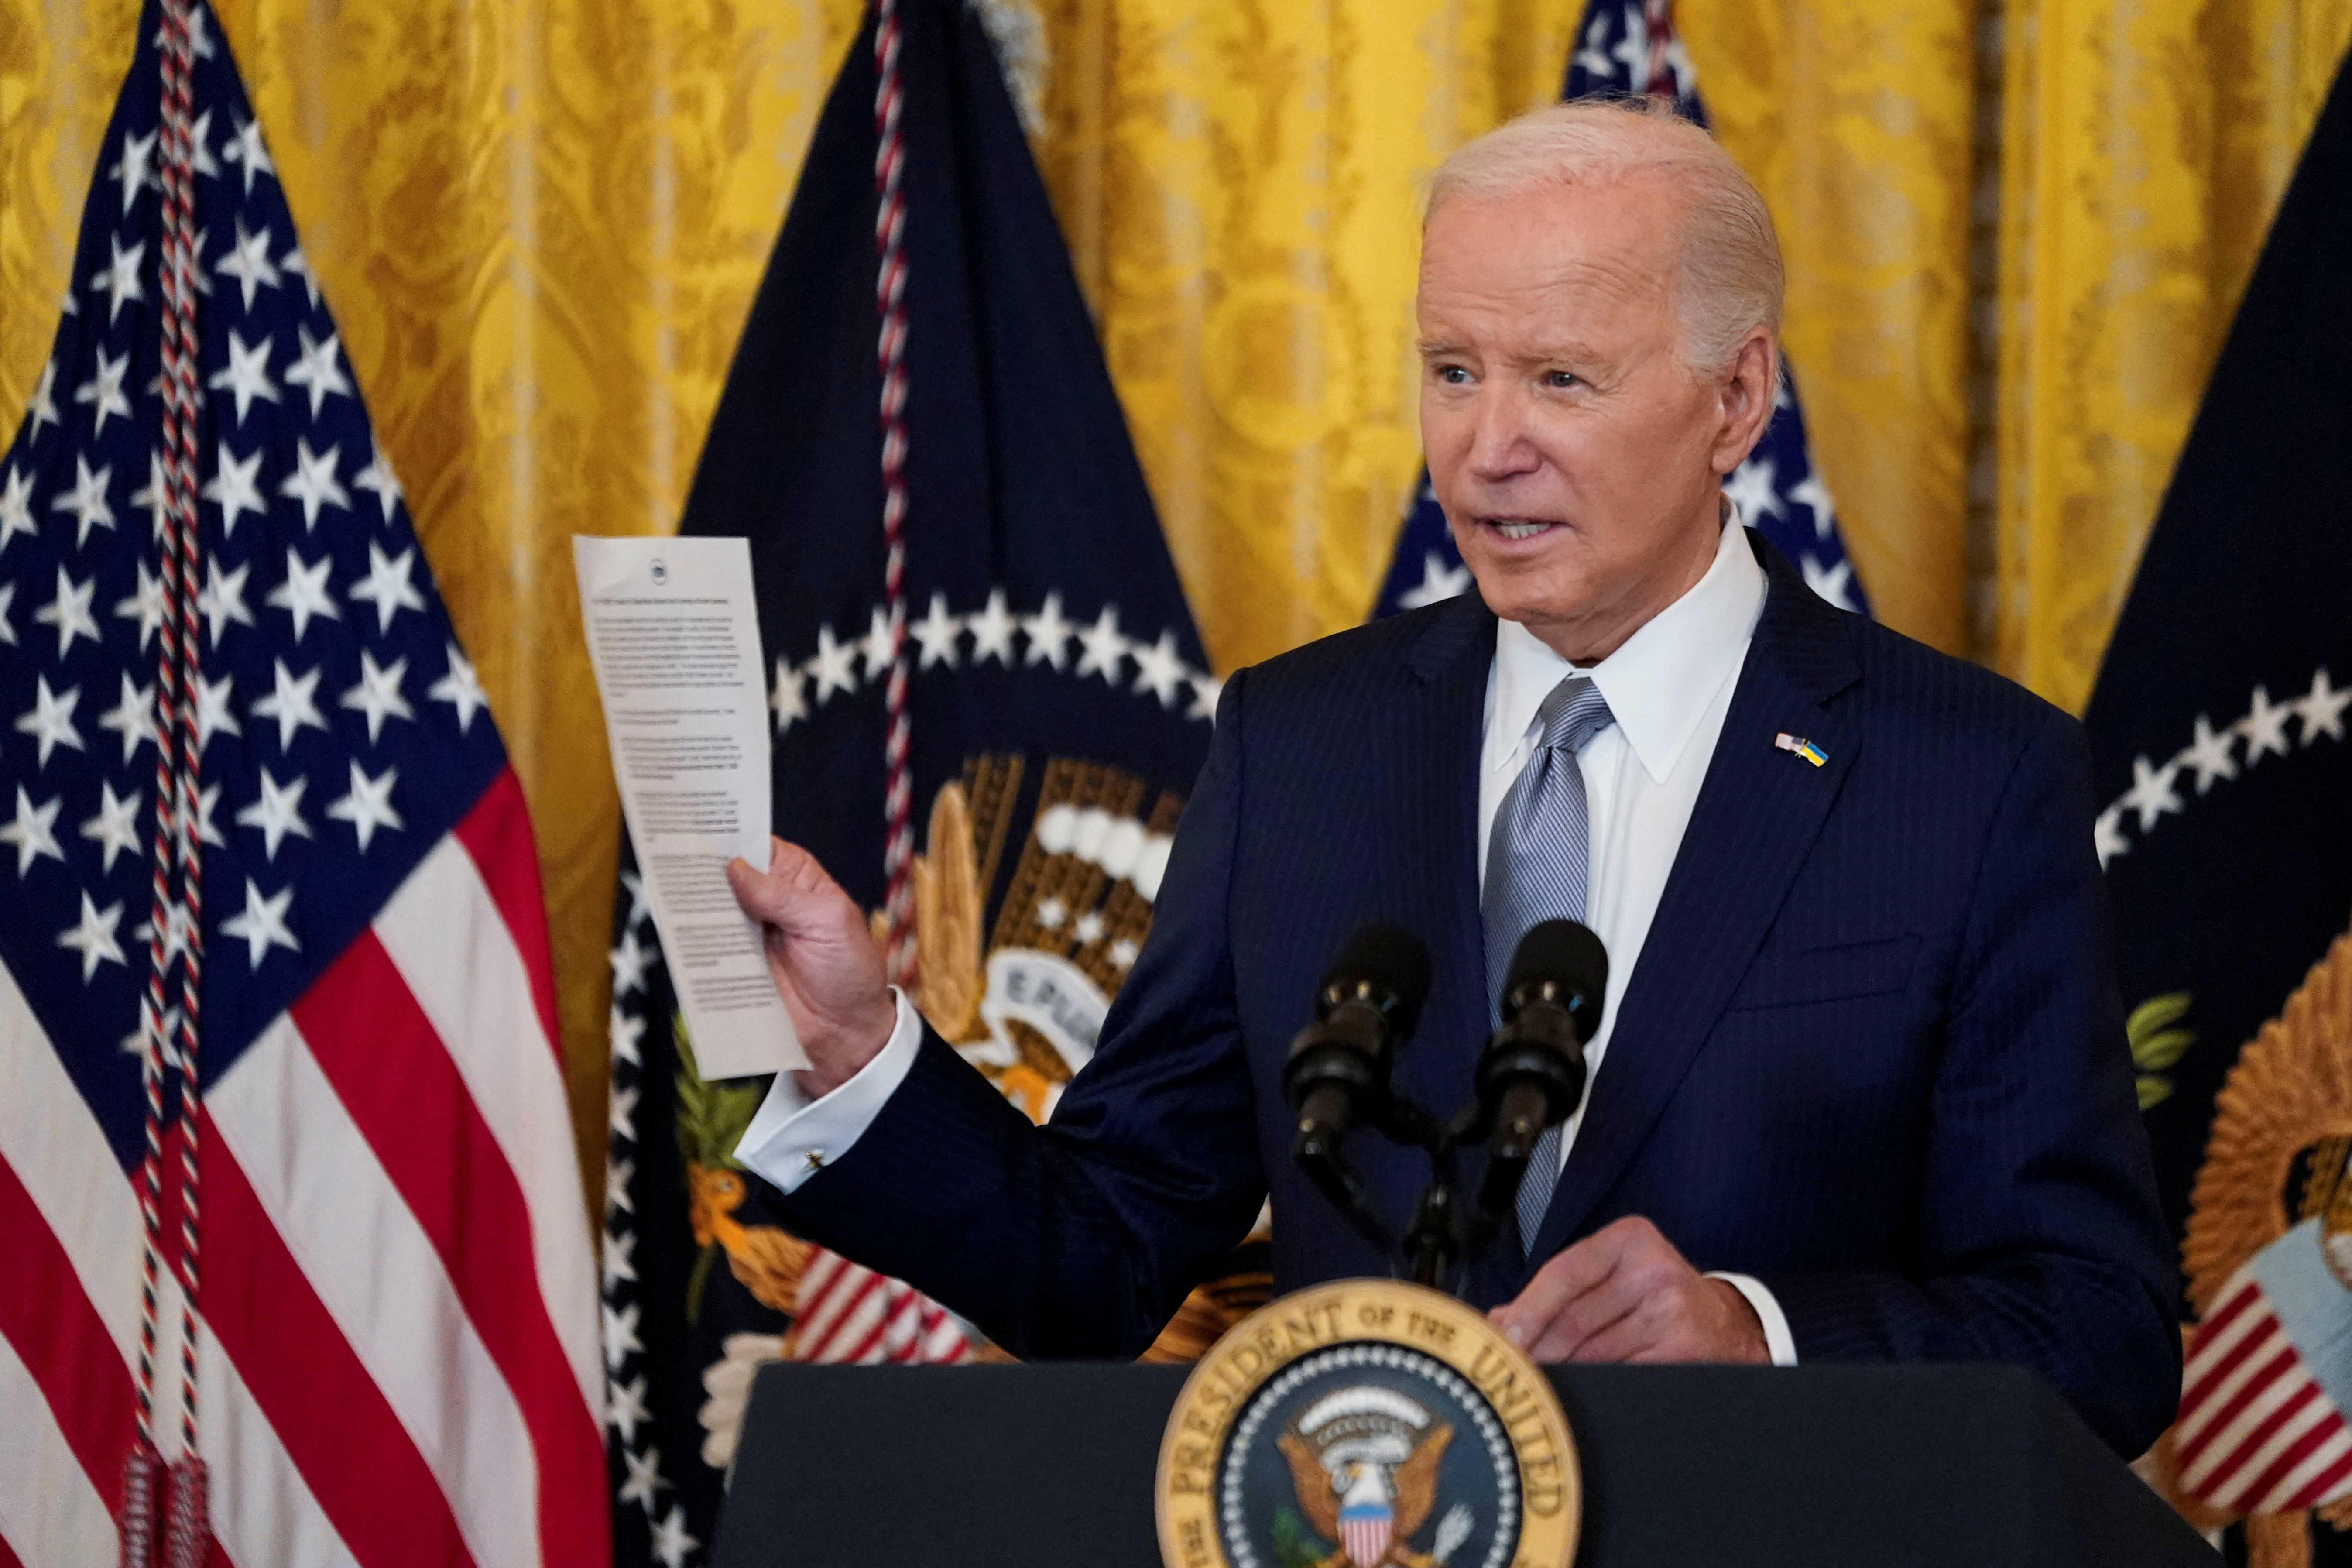 U.S. President Joe Biden meets with U.S. governors at the White House in Washington